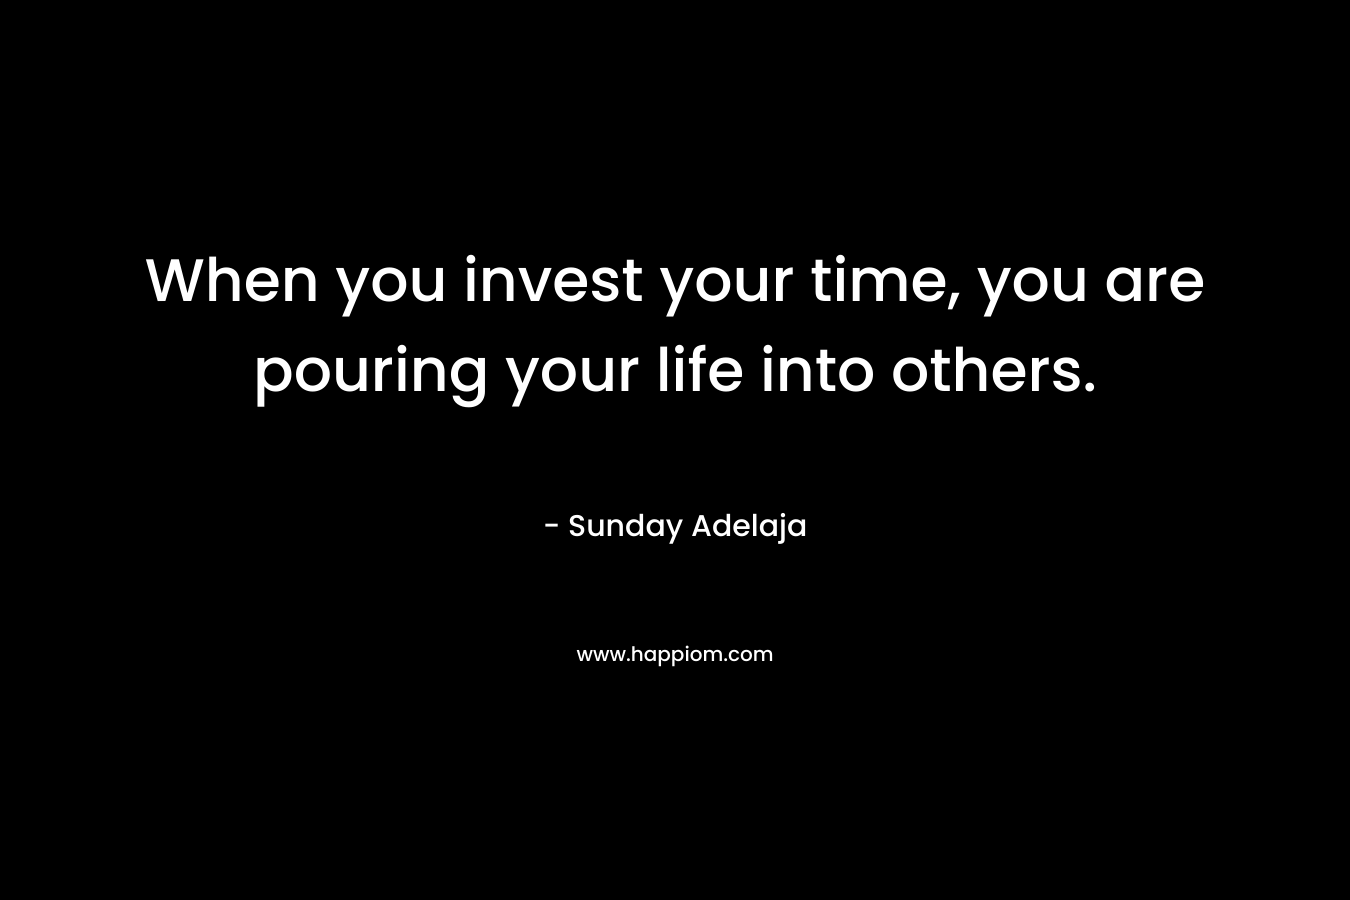 When you invest your time, you are pouring your life into others.